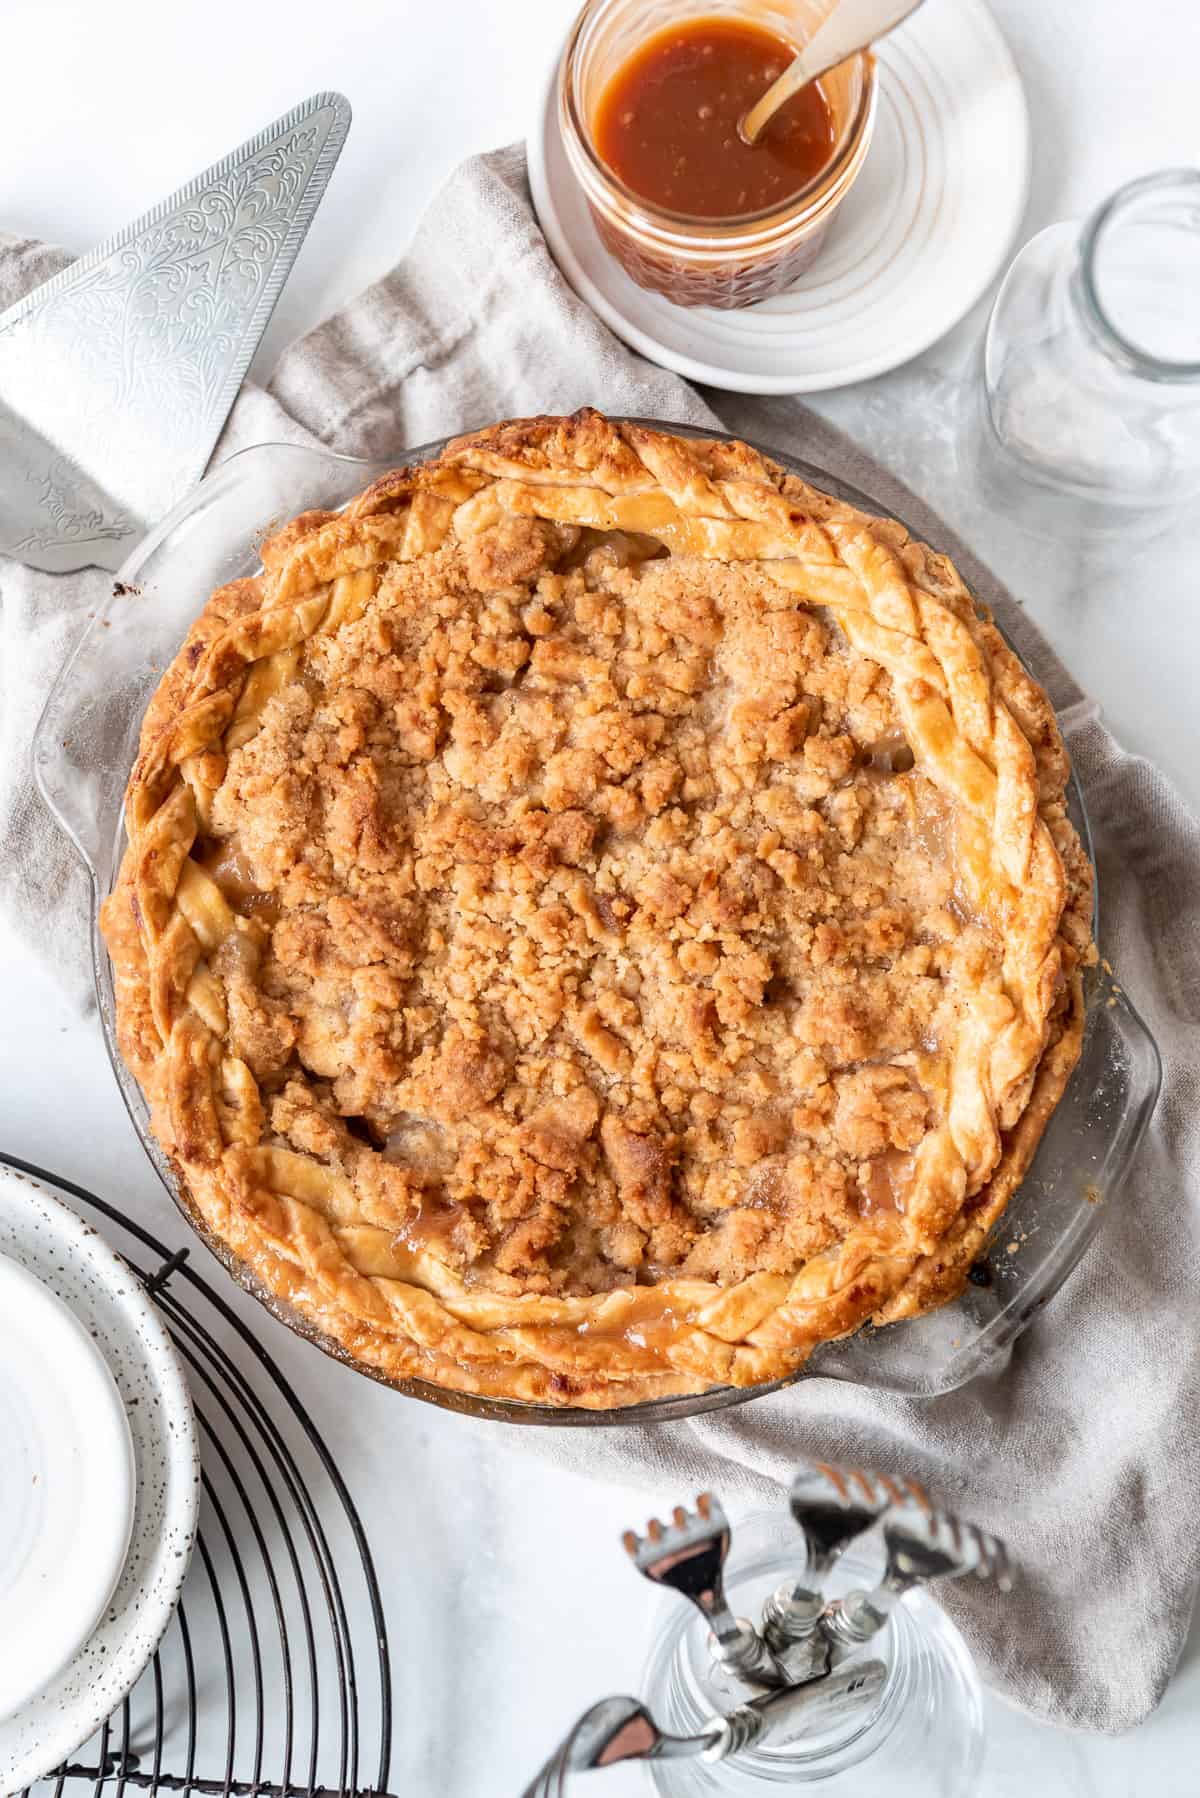 A whole baked pear pie.